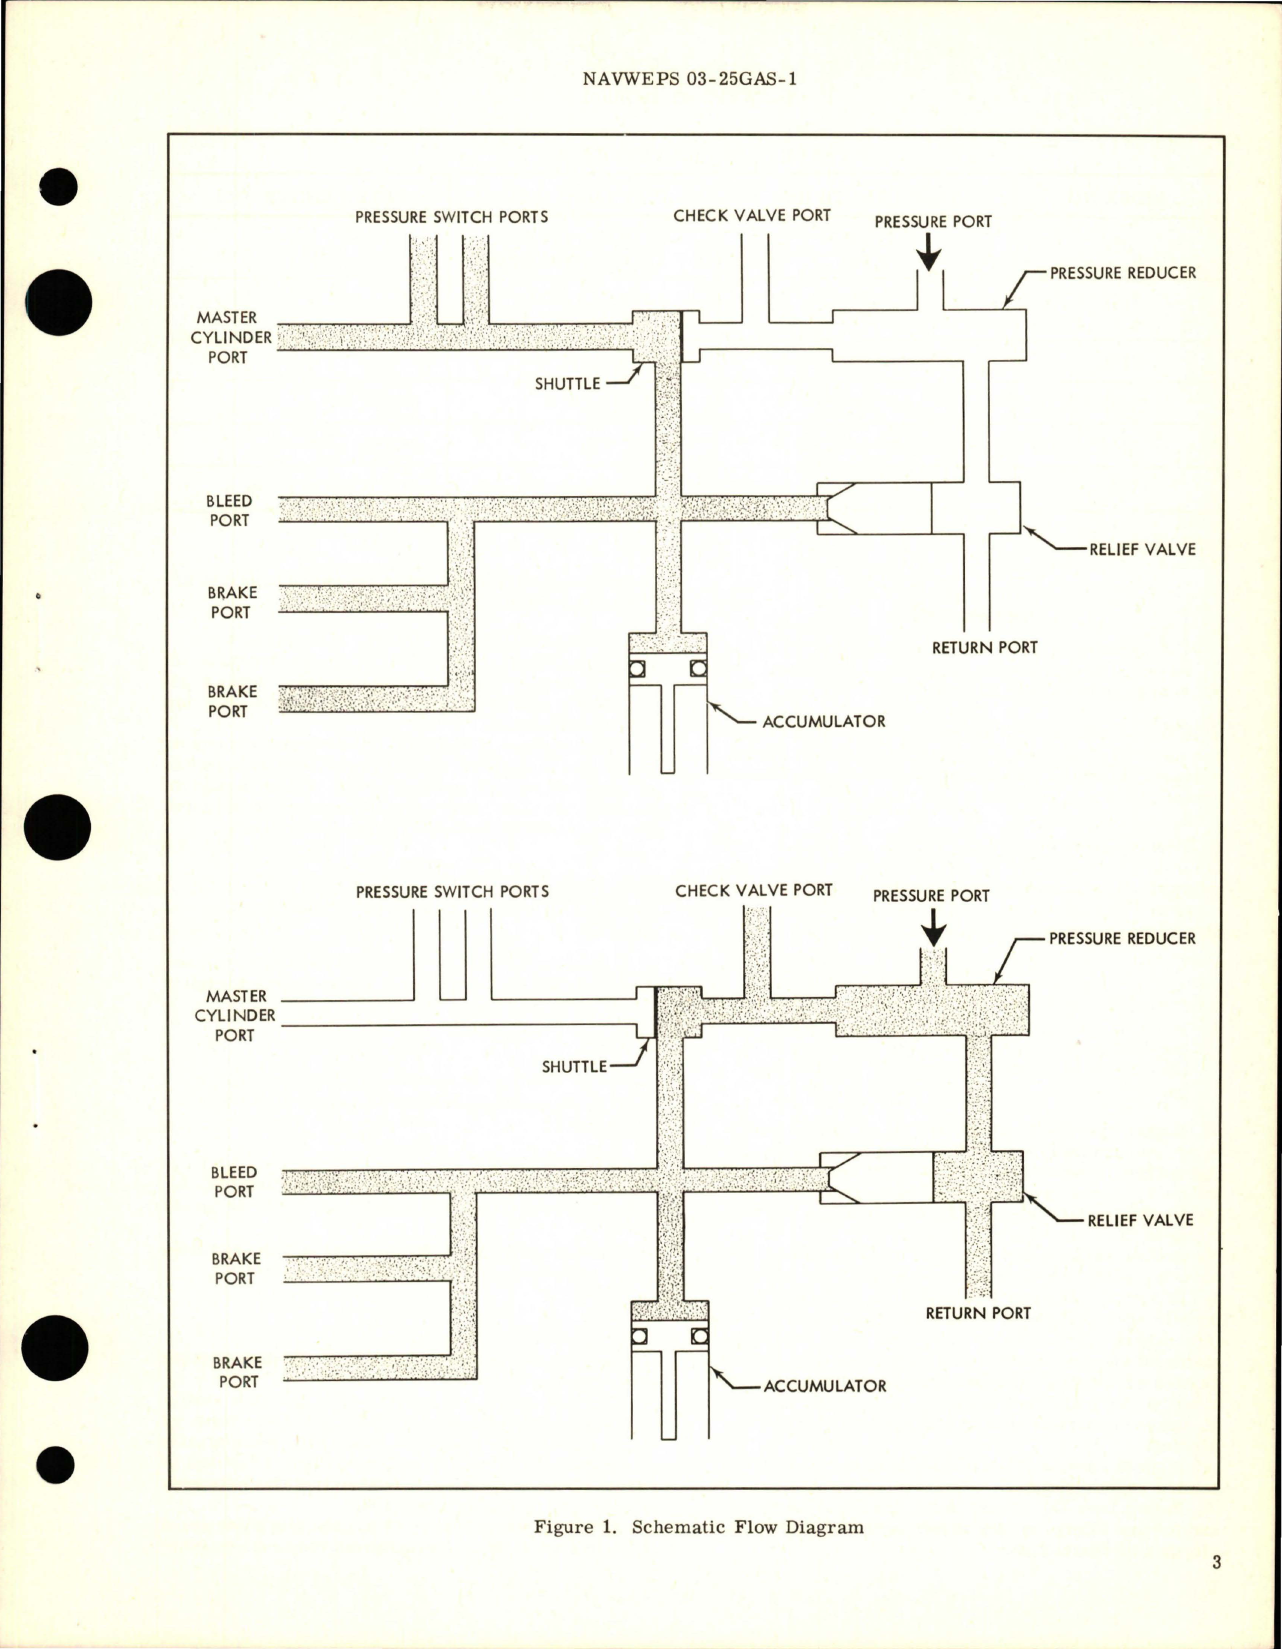 Sample page 5 from AirCorps Library document: Overhaul Instructions with Illustrated Parts Breakdown for Hydraulic Rotor Brake System Manifold Assembly - Part 13950 and 13950-1